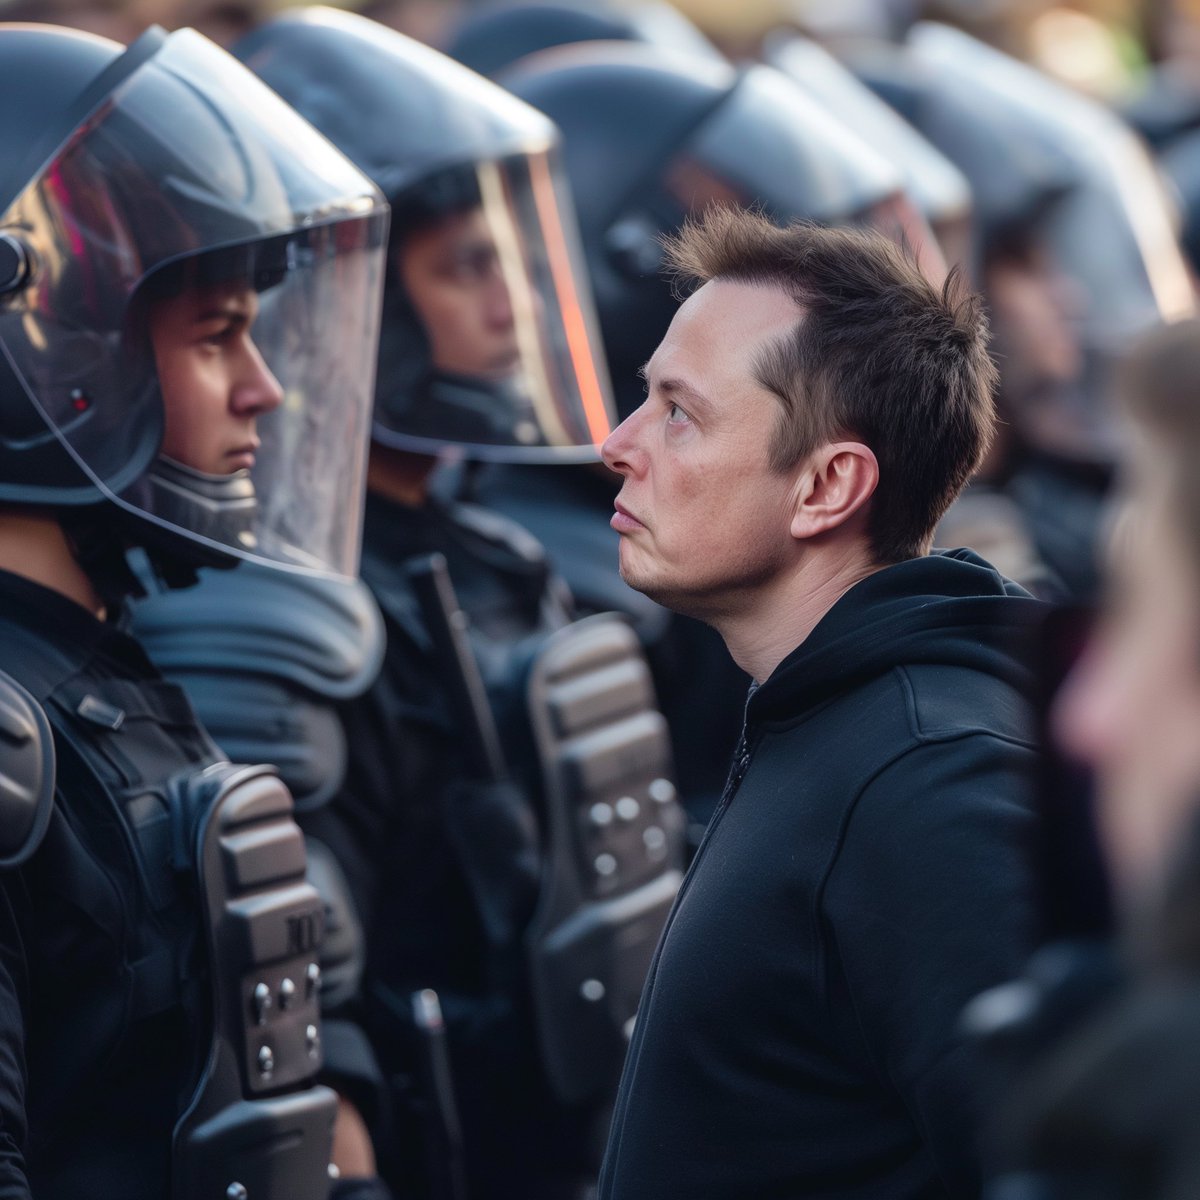 Elon Musk standing up for what is right even in the face of police repression